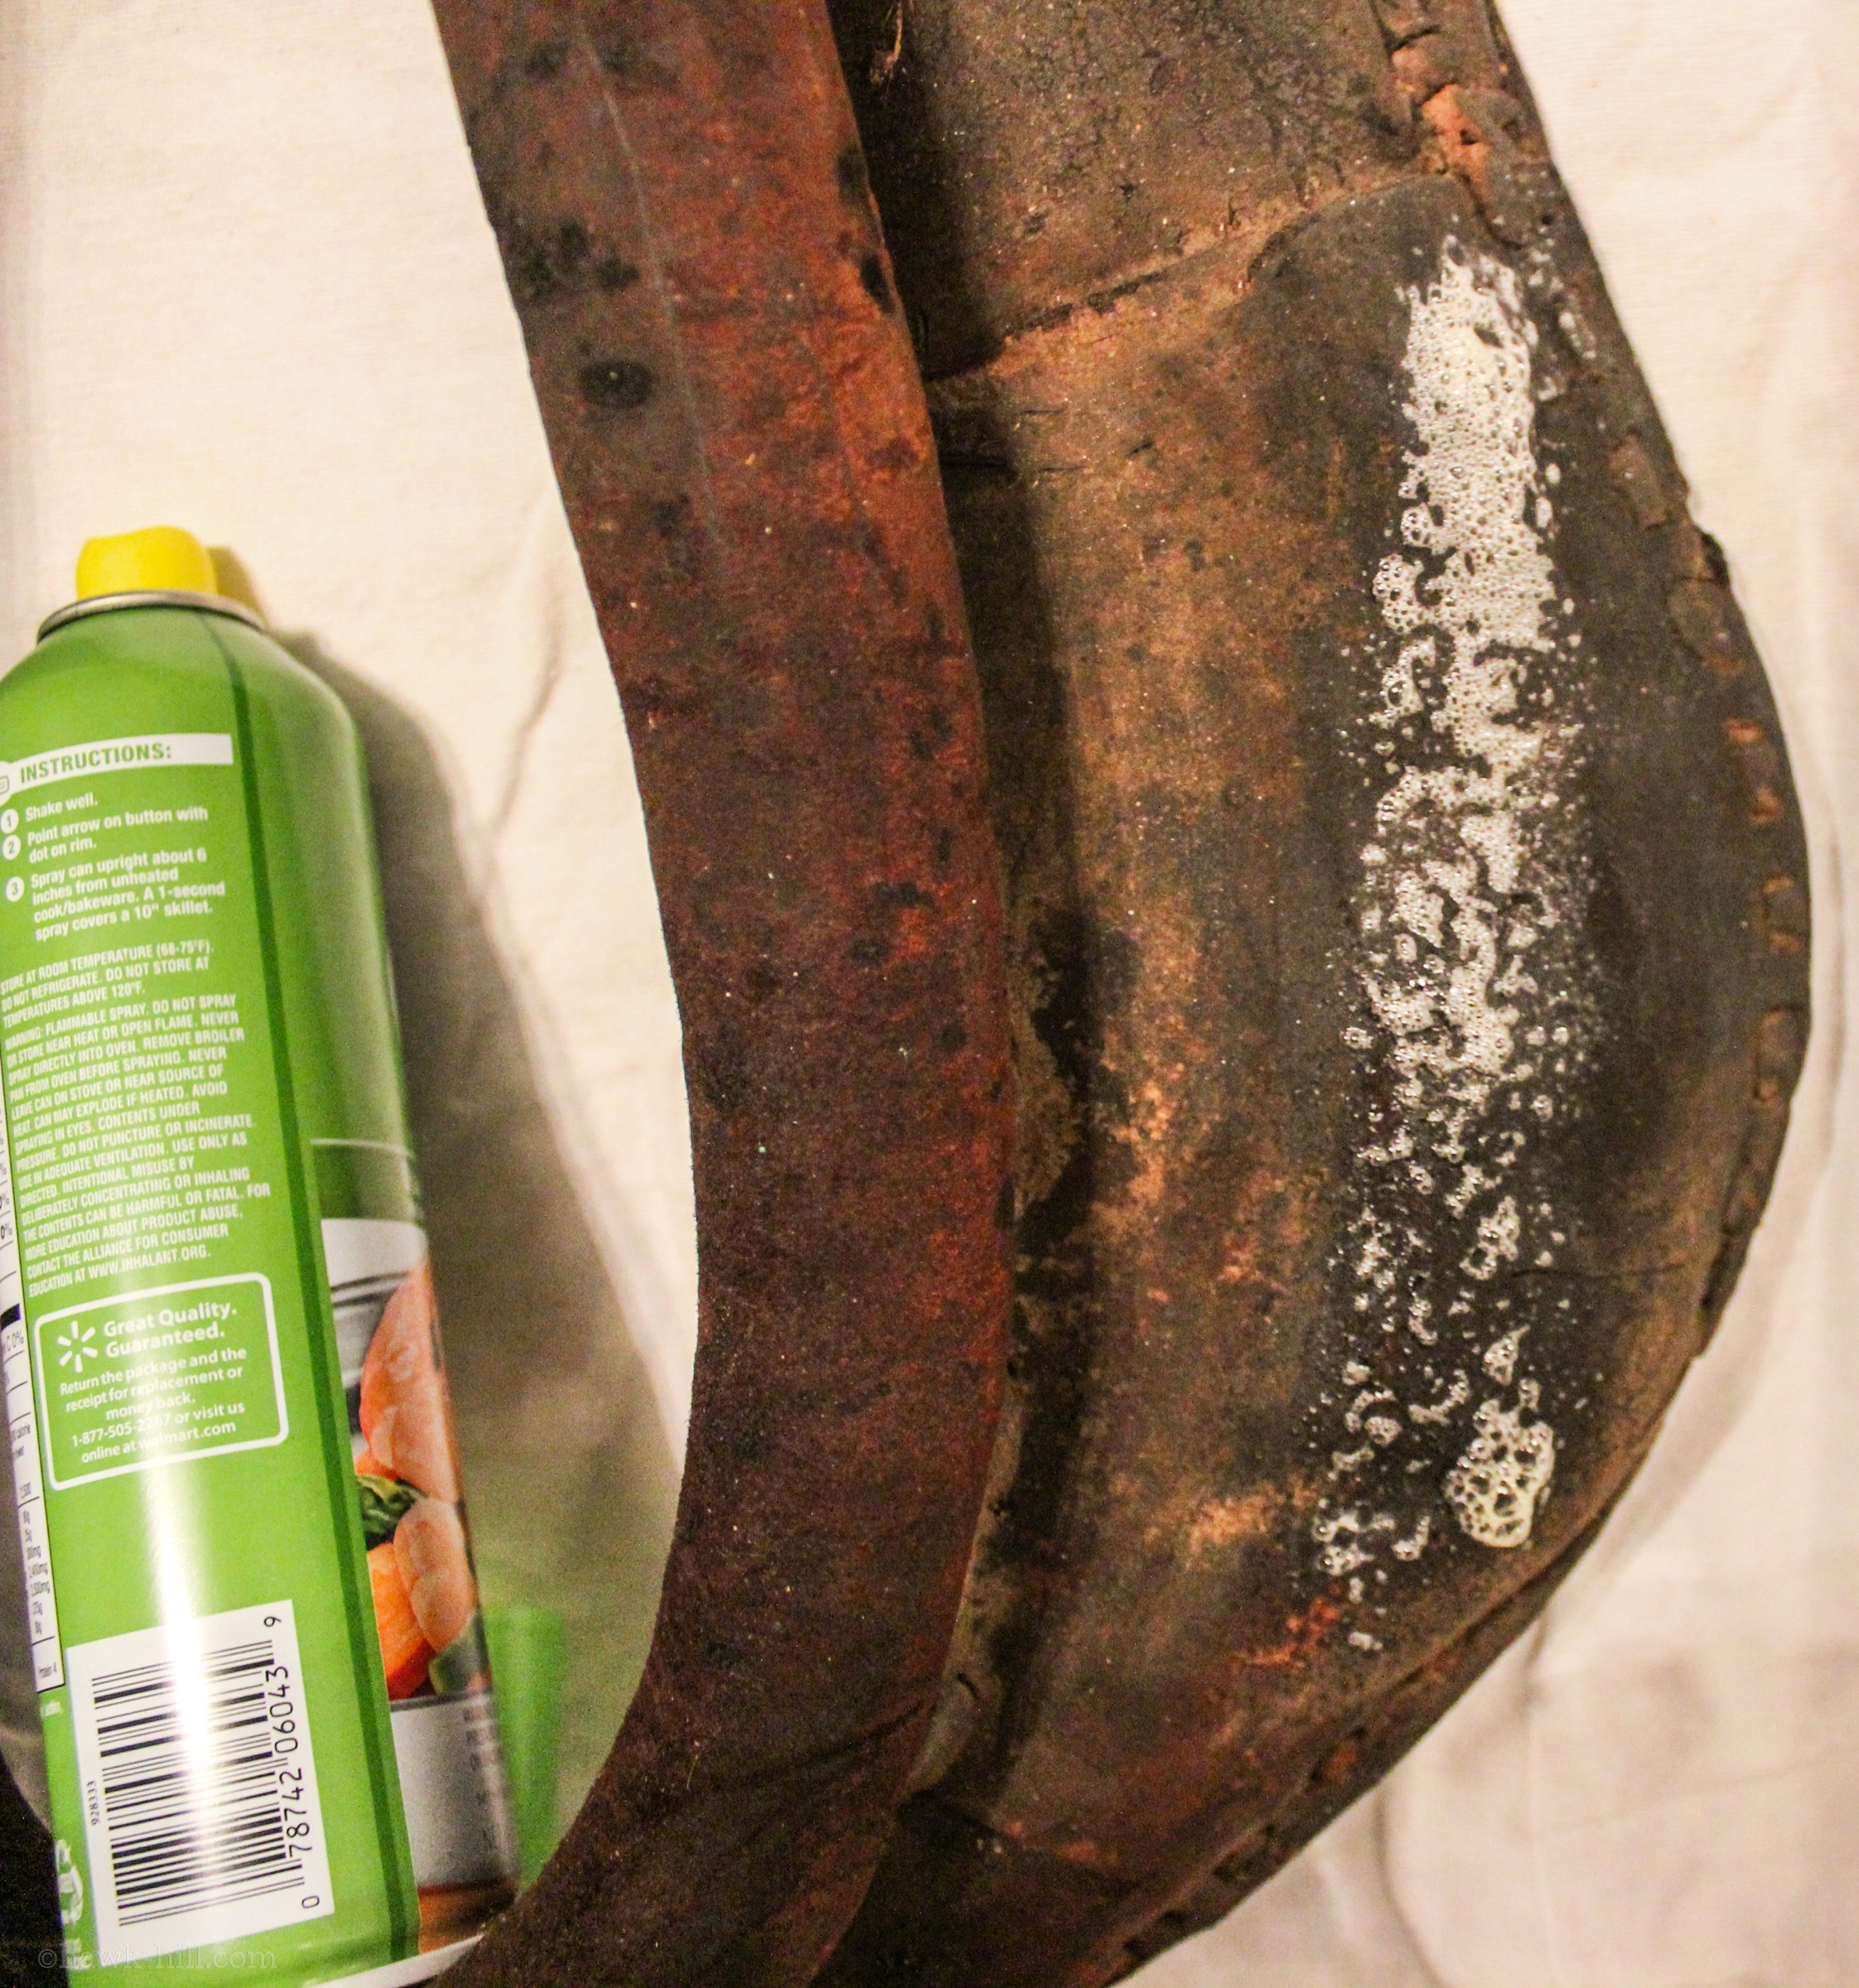 I started by cleaning and oiling the antique harness before building my horse theme Christmas wreath